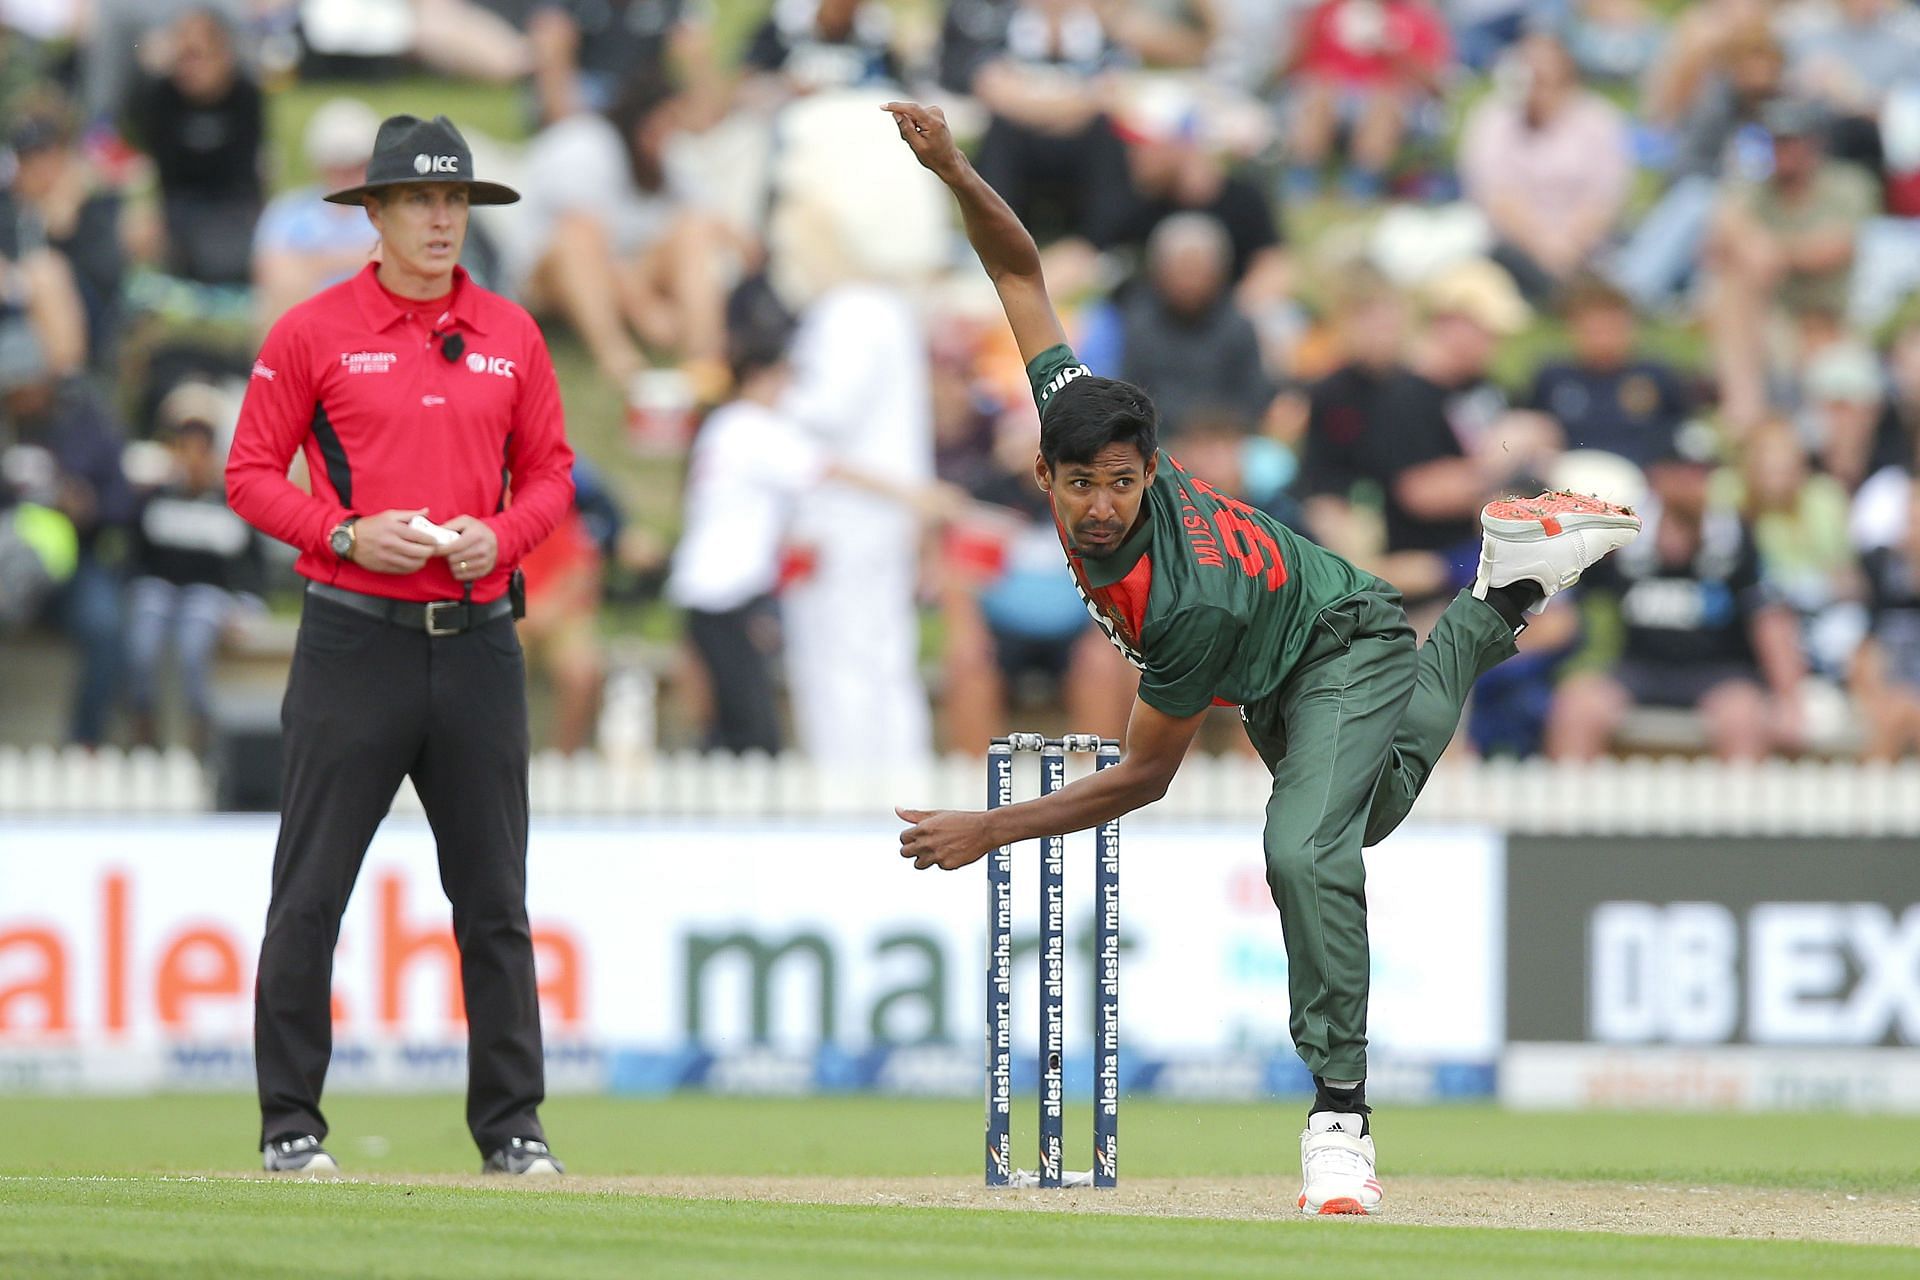 Mustafizur Rahman is yet to get a wicket in the 2021 T20 World Cup Super 12 stage for Bangladesh.